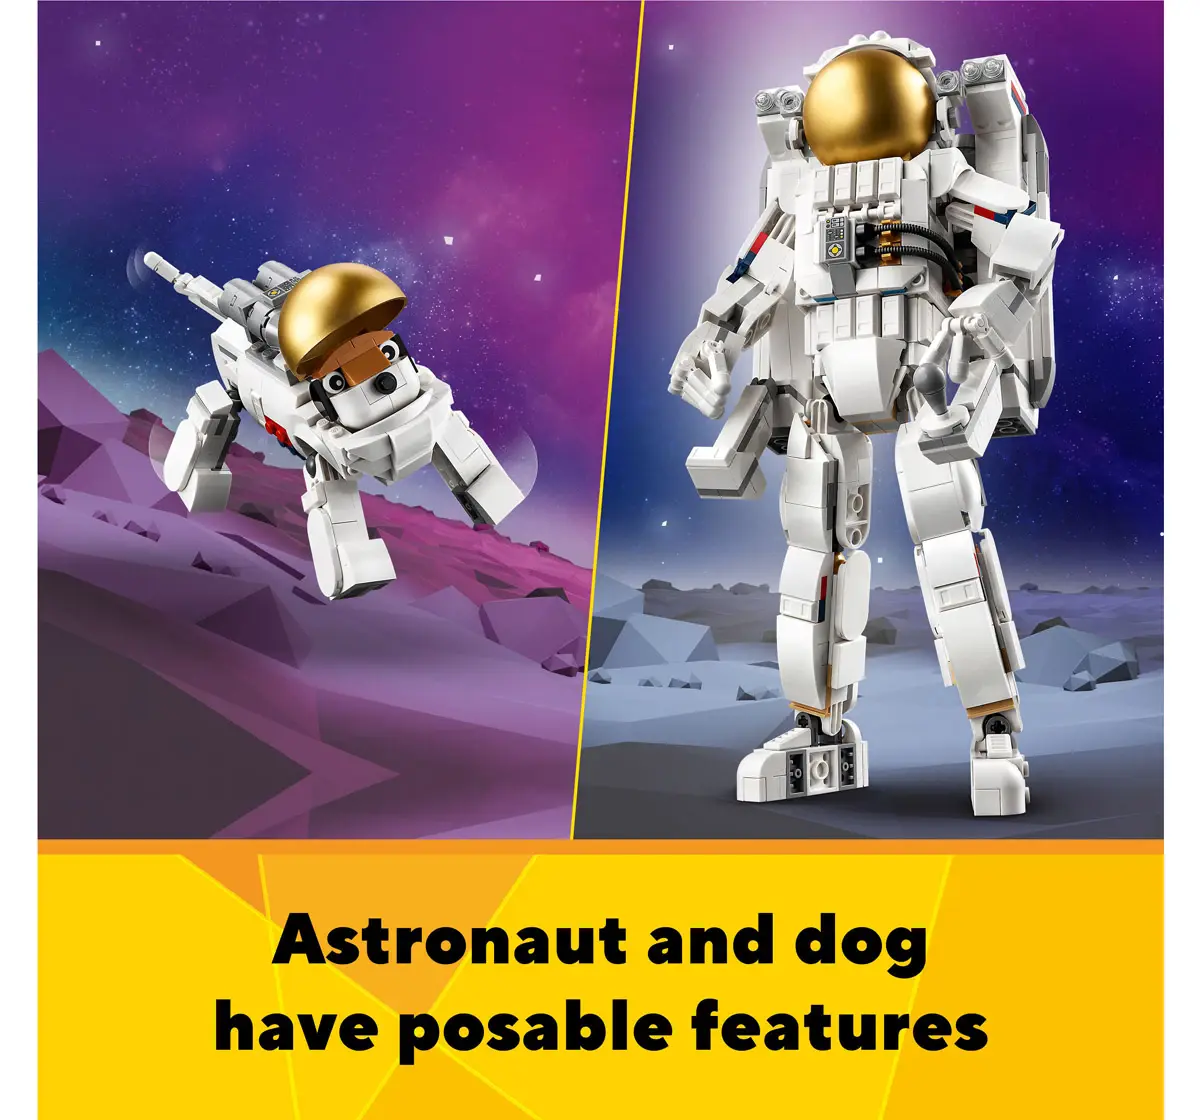 Lego Creator Space Astronaut 3 In 1 Toy Set 31152 Multicolour For Kids Ages 9Y+ (647 Pieces) 